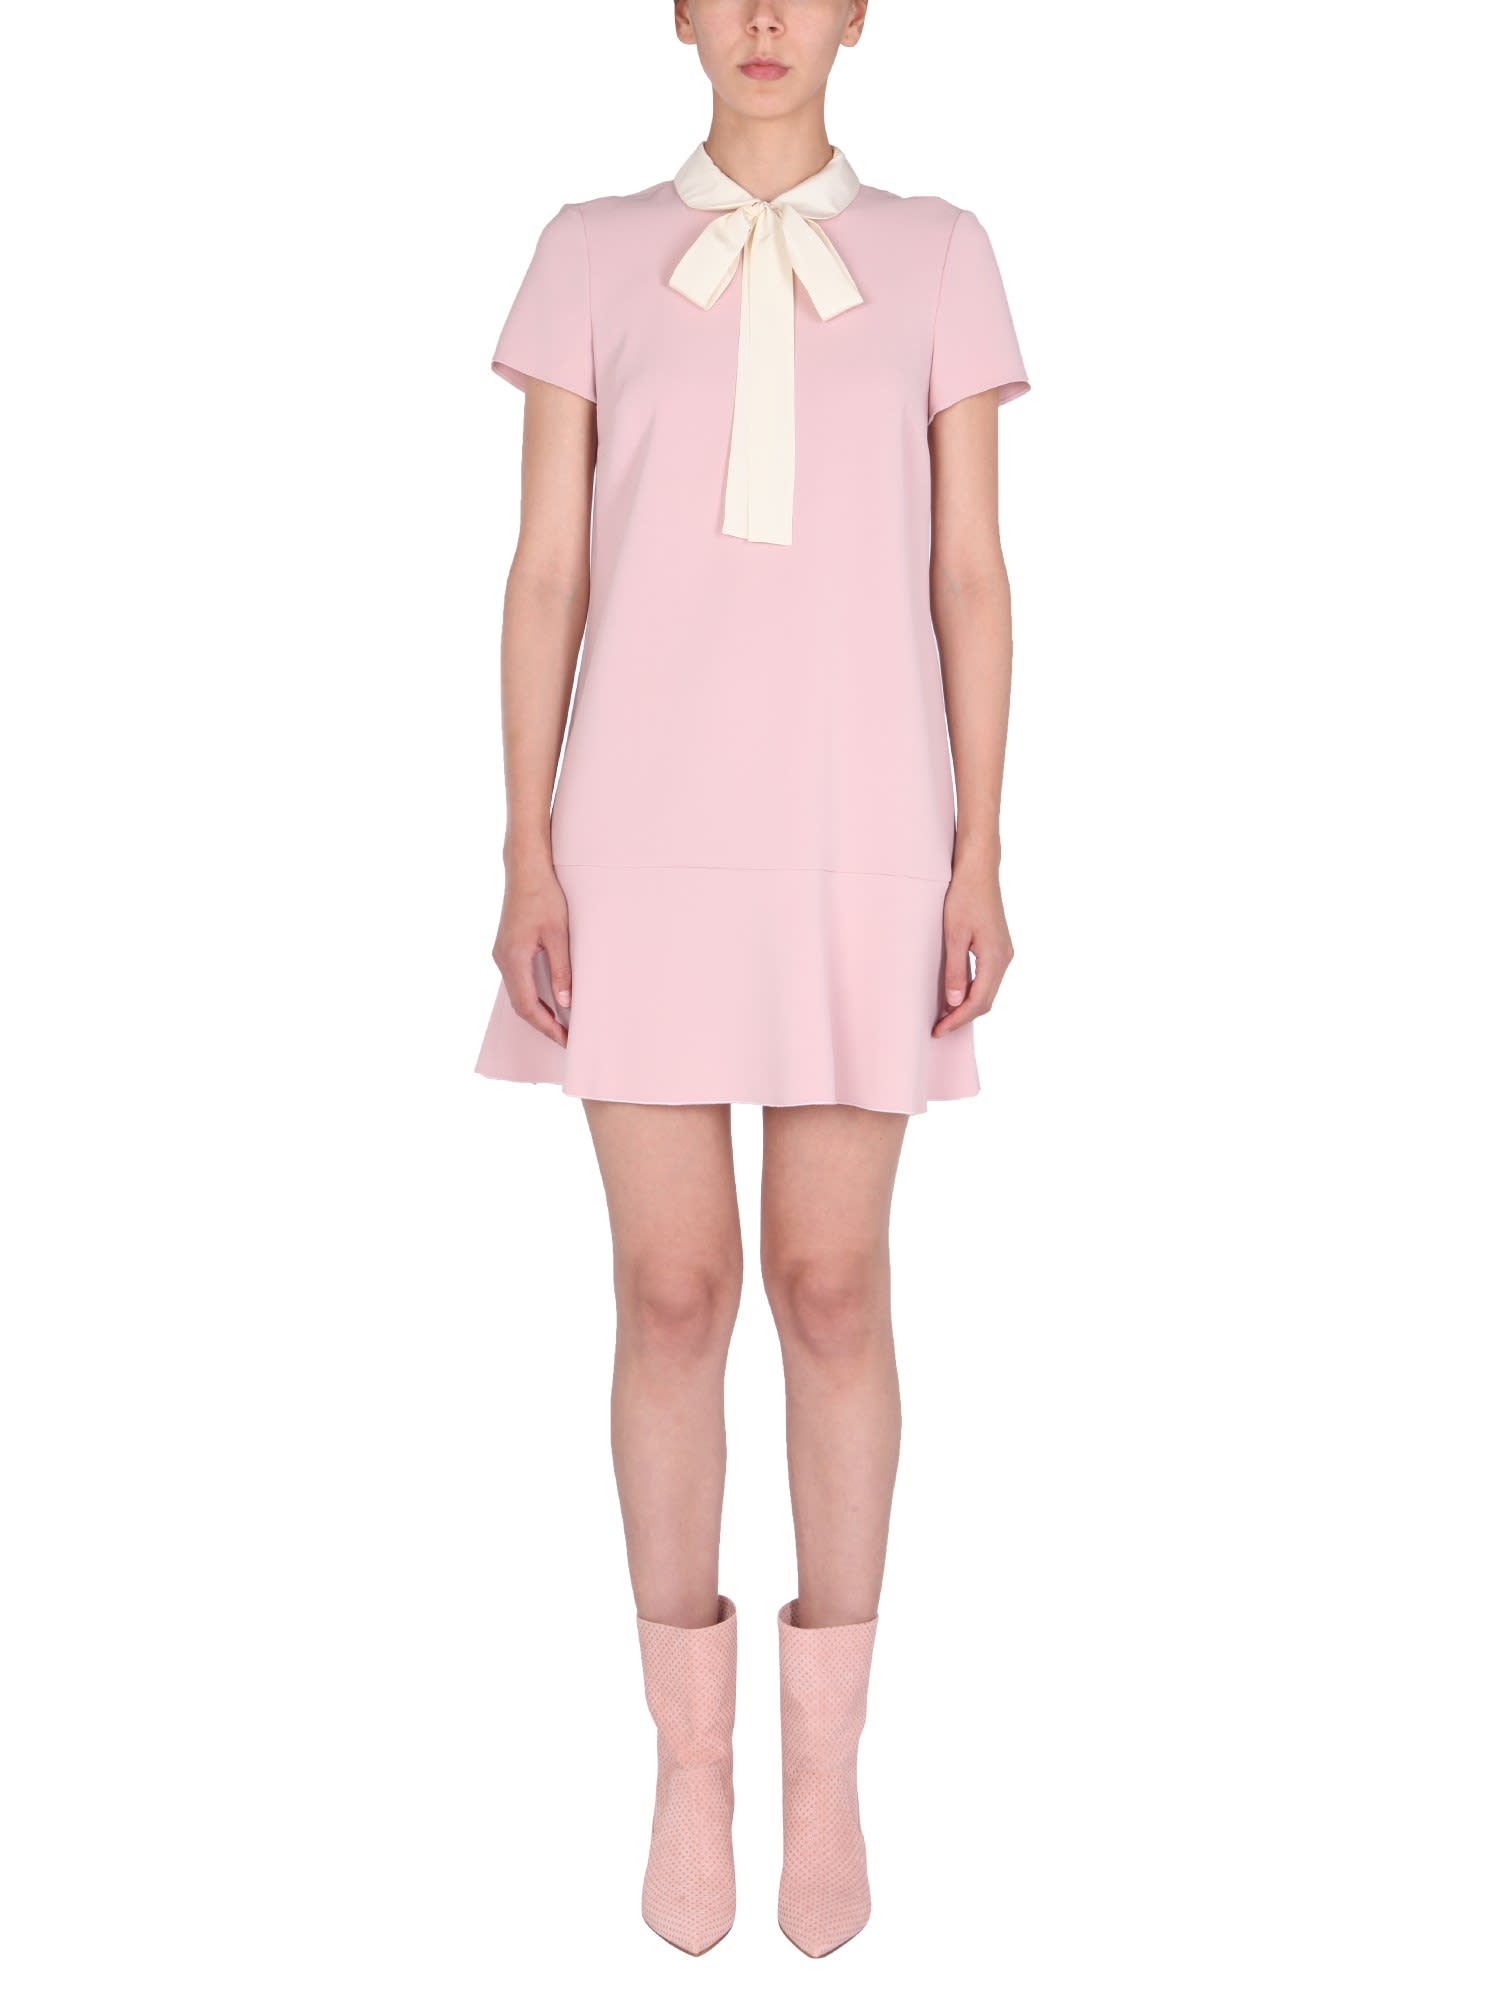 RED Valentino Frisottine Dress With Collar Detail